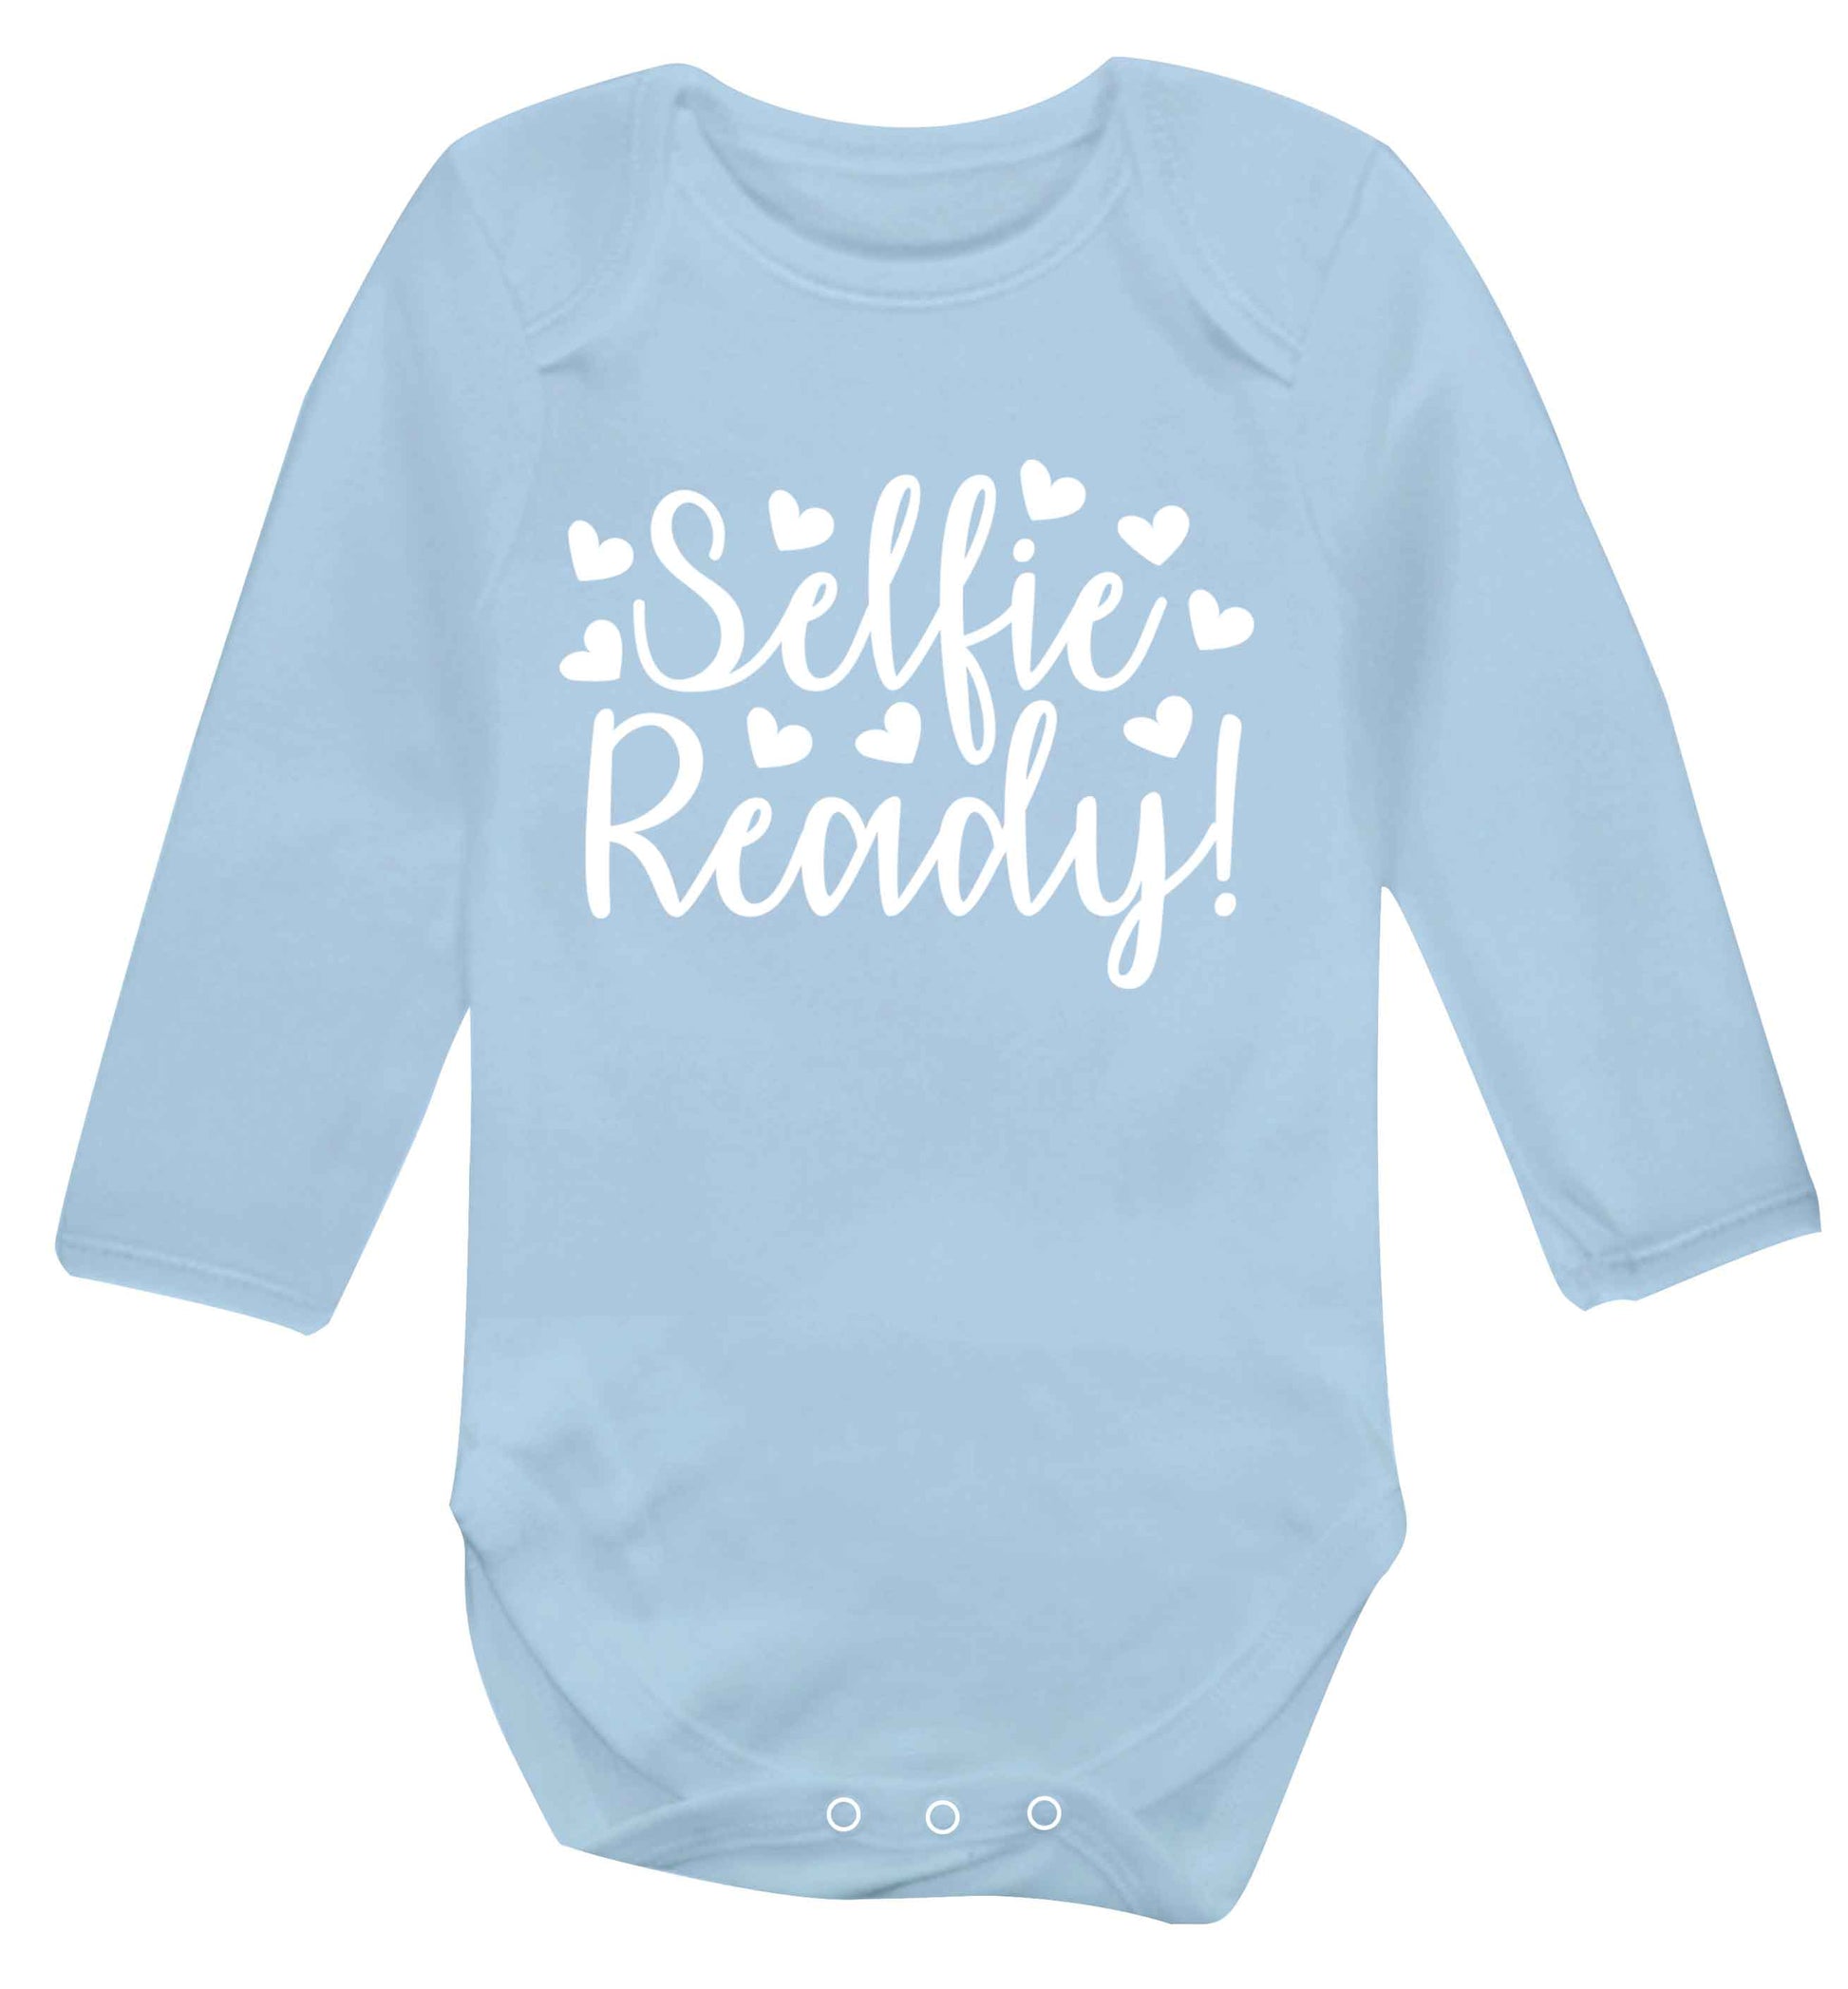 Selfie ready Baby Vest long sleeved pale blue 6-12 months